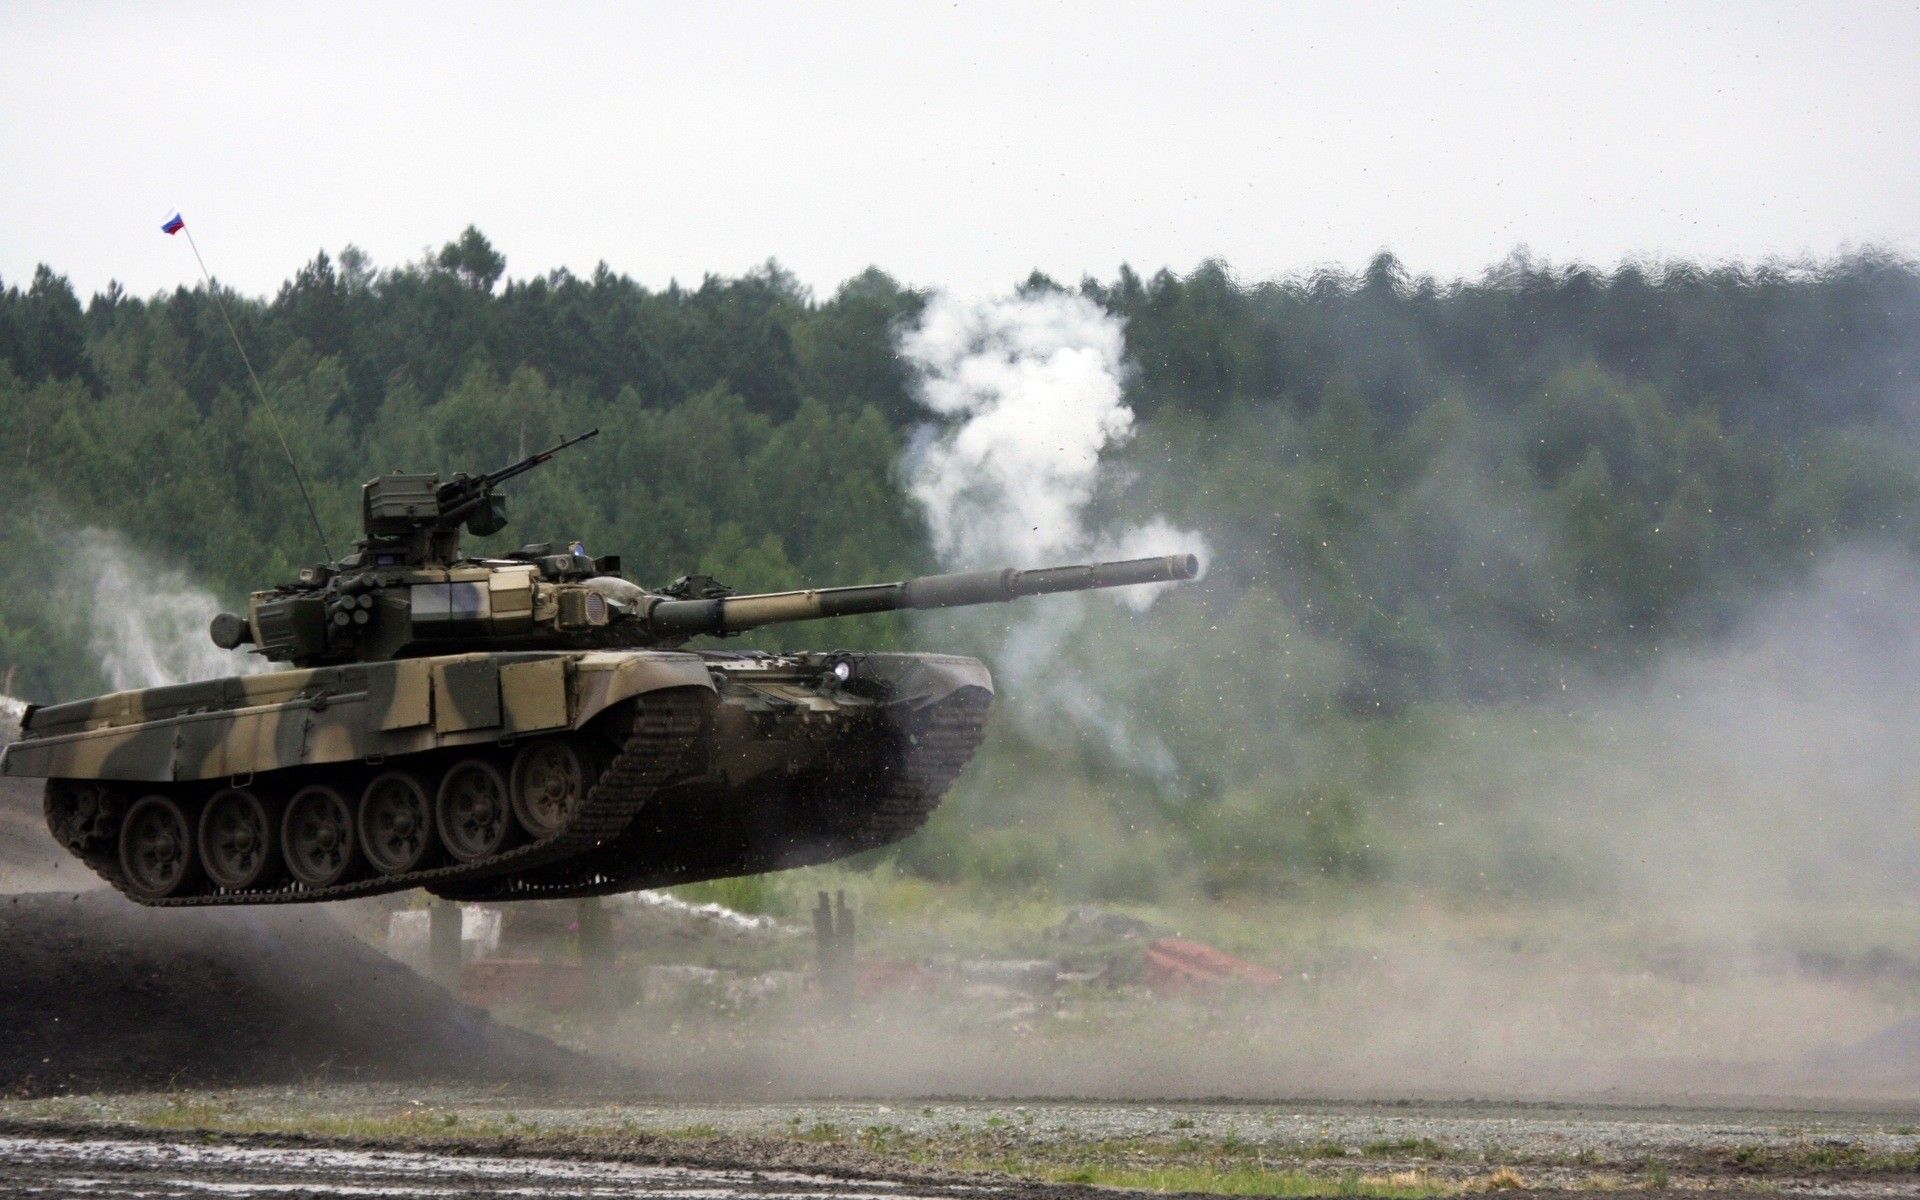 Daily Wallpaper: T 72 Mid Air Shot. I Like To Waste My Time